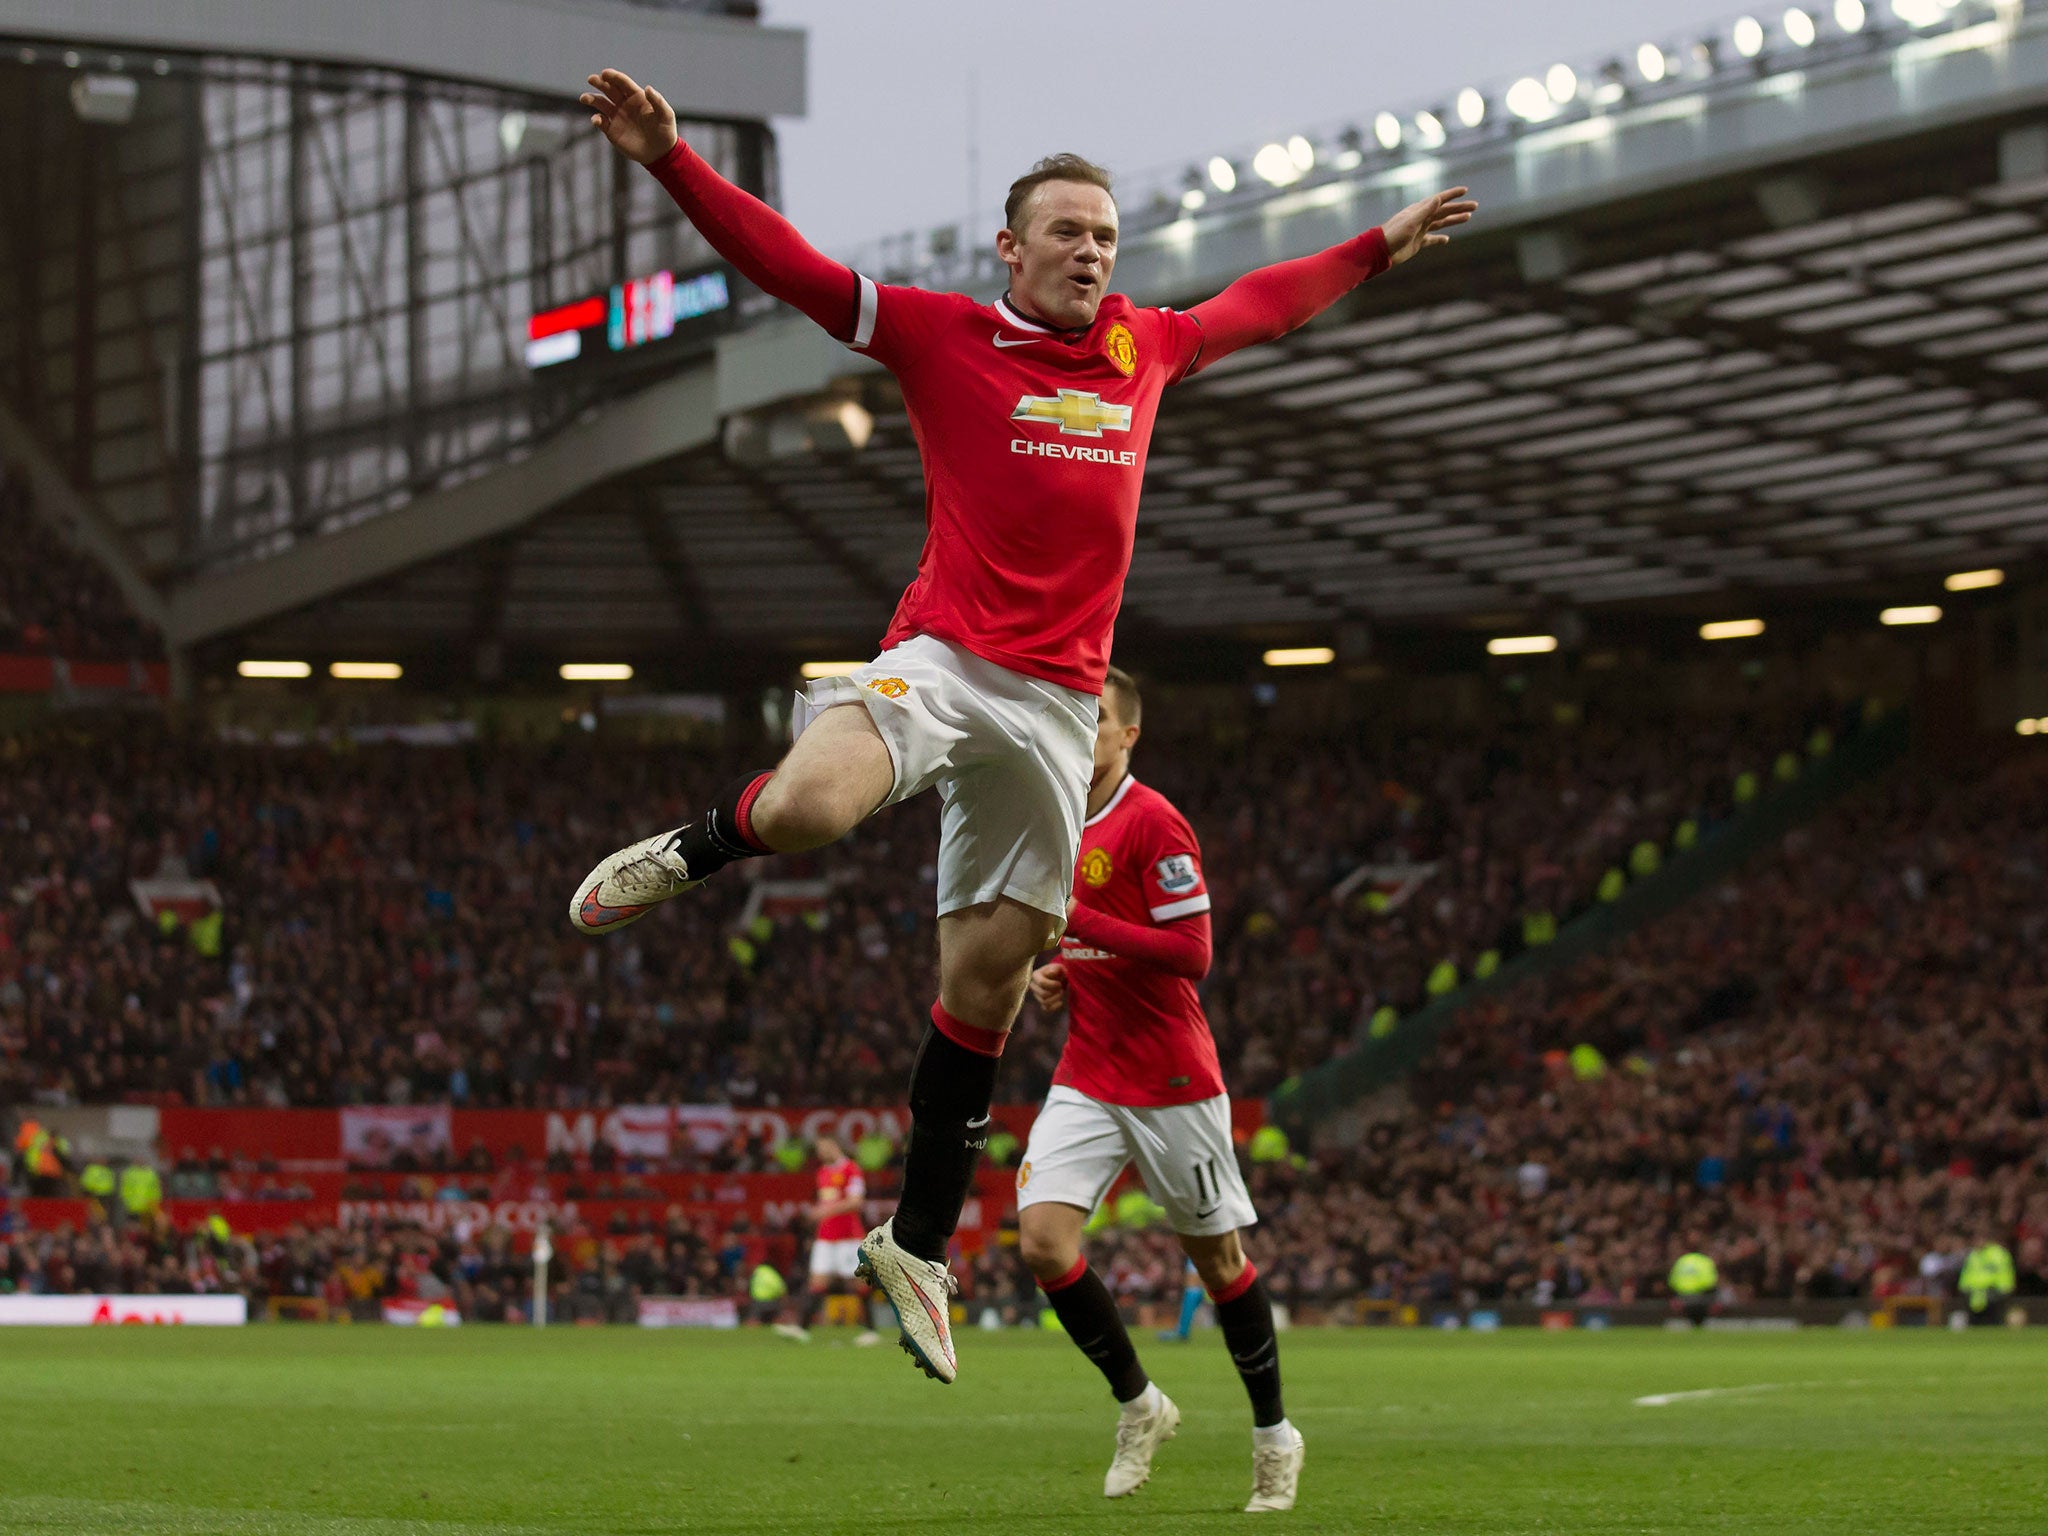 Manchester United's Wayne Rooney, centre, celebrates after scoring his second goal during the English Premier League soccer match between Manchester United and Sunderland at Old Trafford Stadium, Manchester